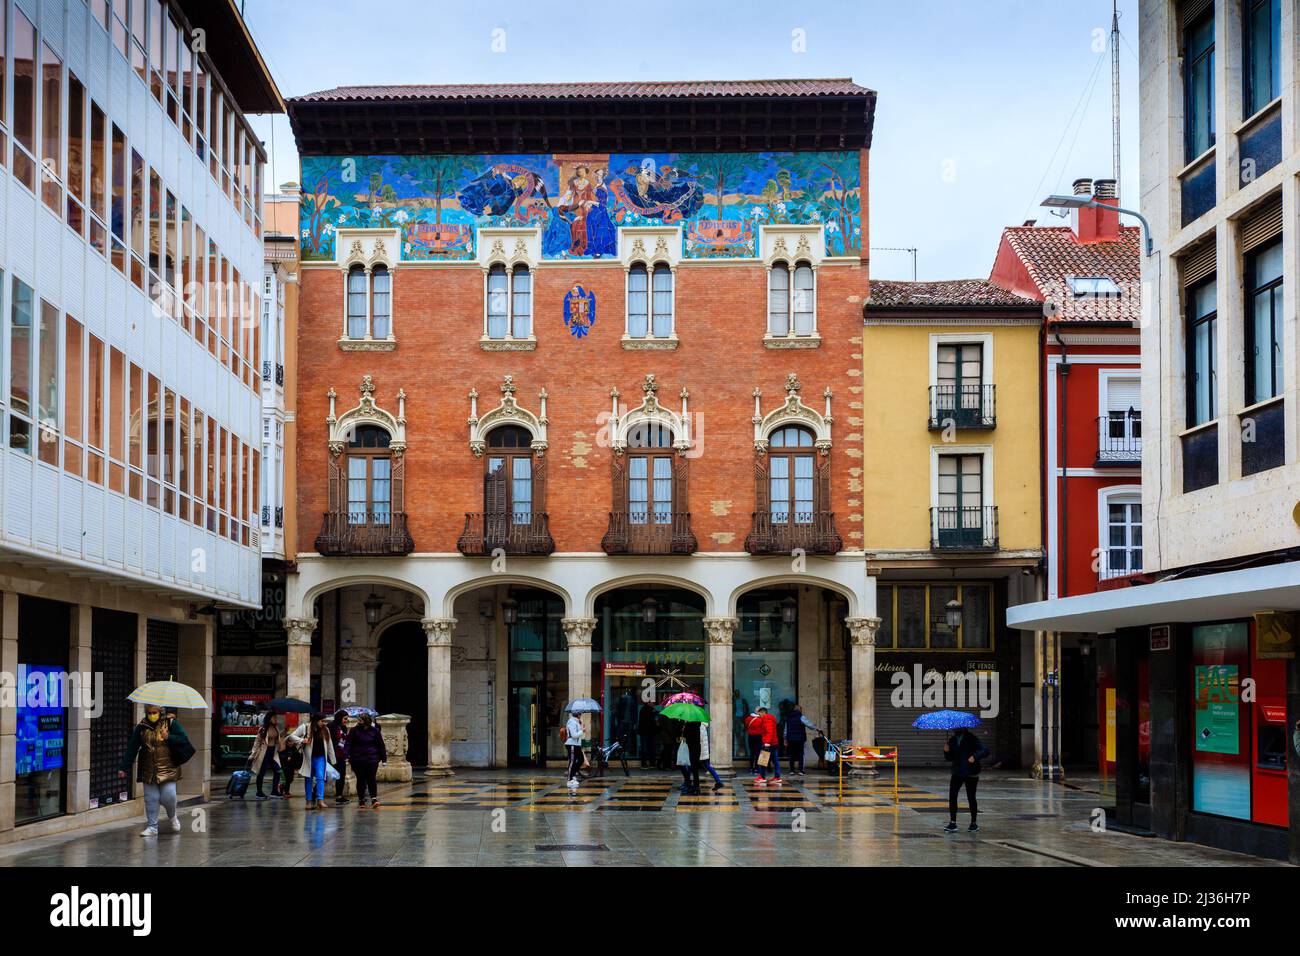 The Colegio Villandrando, a modernist building, is decorated with colourful ceramics. It has been listed as a Cultural Interest Site. Palencia, Spain. Stock Photo